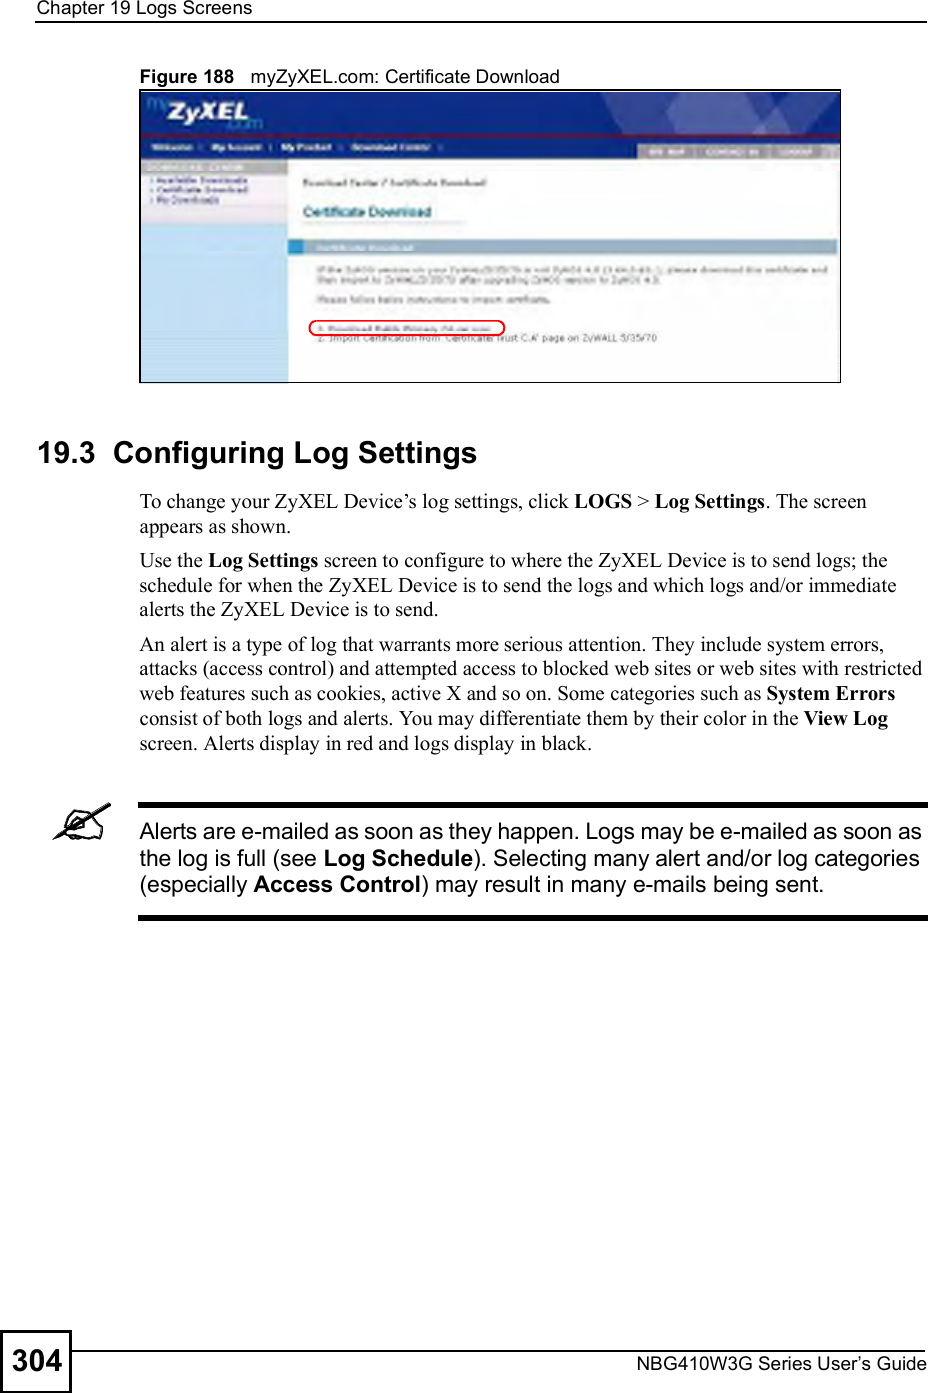 Chapter 19Logs ScreensNBG410W3G Series User s Guide304Figure 188   myZyXEL.com: Certificate Download19.3  Configuring Log Settings To change your ZyXEL Device!s log settings, click LOGS &gt; Log Settings. The screen appears as shown. Use the Log Settings screen to configure to where the ZyXEL Device is to send logs; the schedule for when the ZyXEL Device is to send the logs and which logs and/or immediate alerts the ZyXEL Device is to send. An alert is a type of log that warrants more serious attention. They include system errors, attacks (access control) and attempted access to blocked web sites or web sites with restricted web features such as cookies, active X and so on. Some categories such as System Errors consist of both logs and alerts. You may differentiate them by their color in the View Log screen. Alerts display in red and logs display in black.Alerts are e-mailed as soon as they happen. Logs may be e-mailed as soon as the log is full (see Log Schedule). Selecting many alert and/or log categories (especially Access Control) may result in many e-mails being sent.